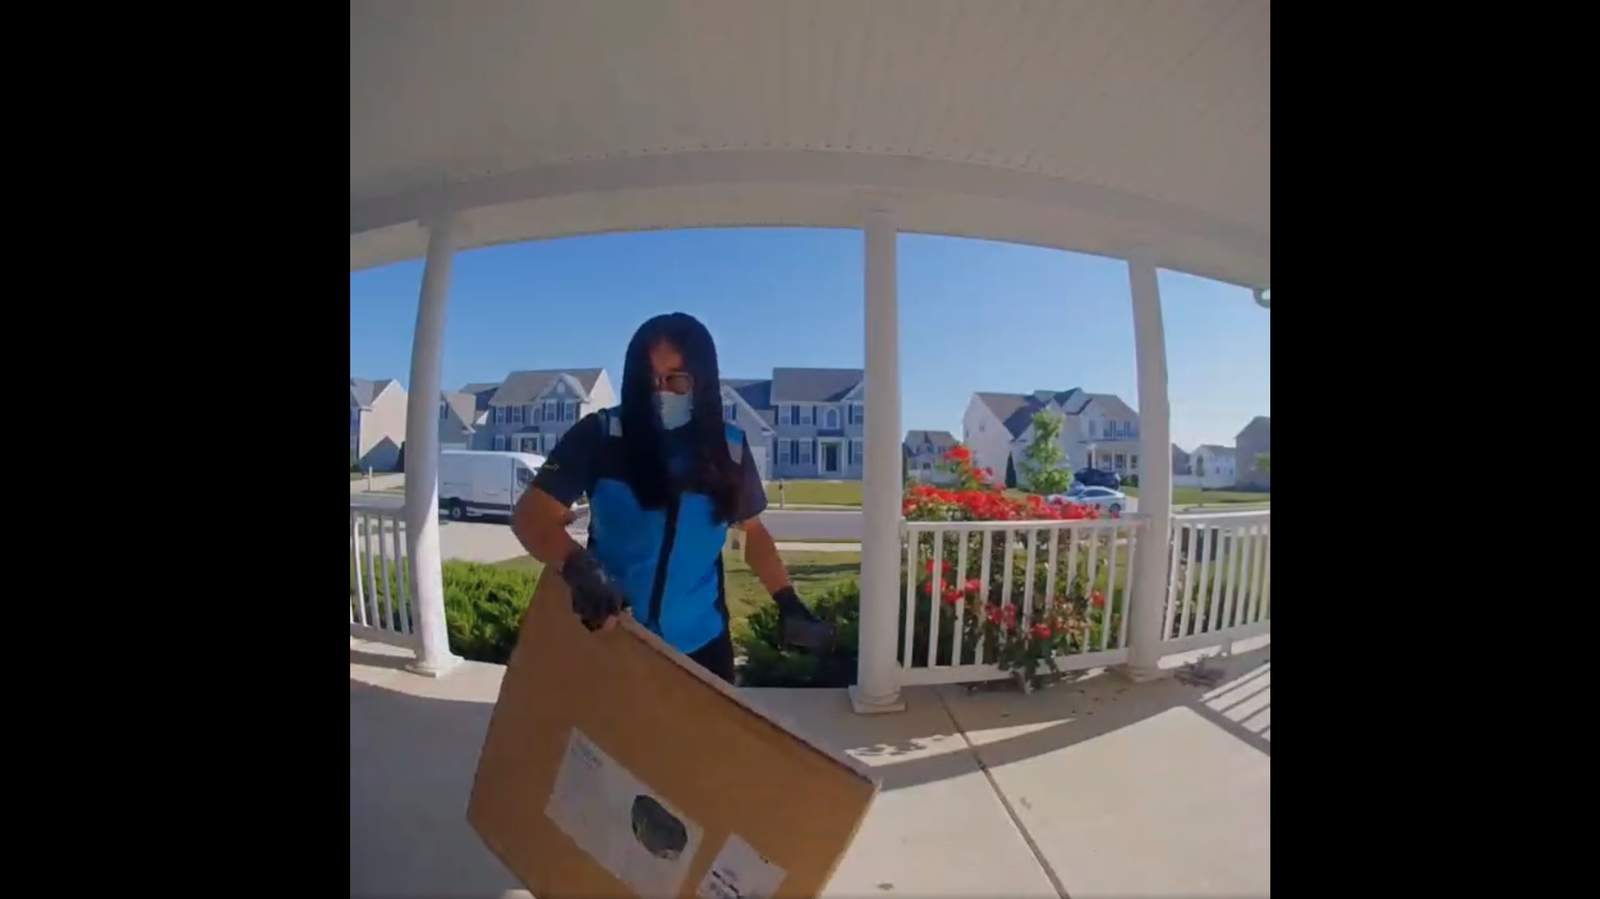 Watch: Teen had hilarious additional instructions for Amazon delivery woman, and she followed them to a tee